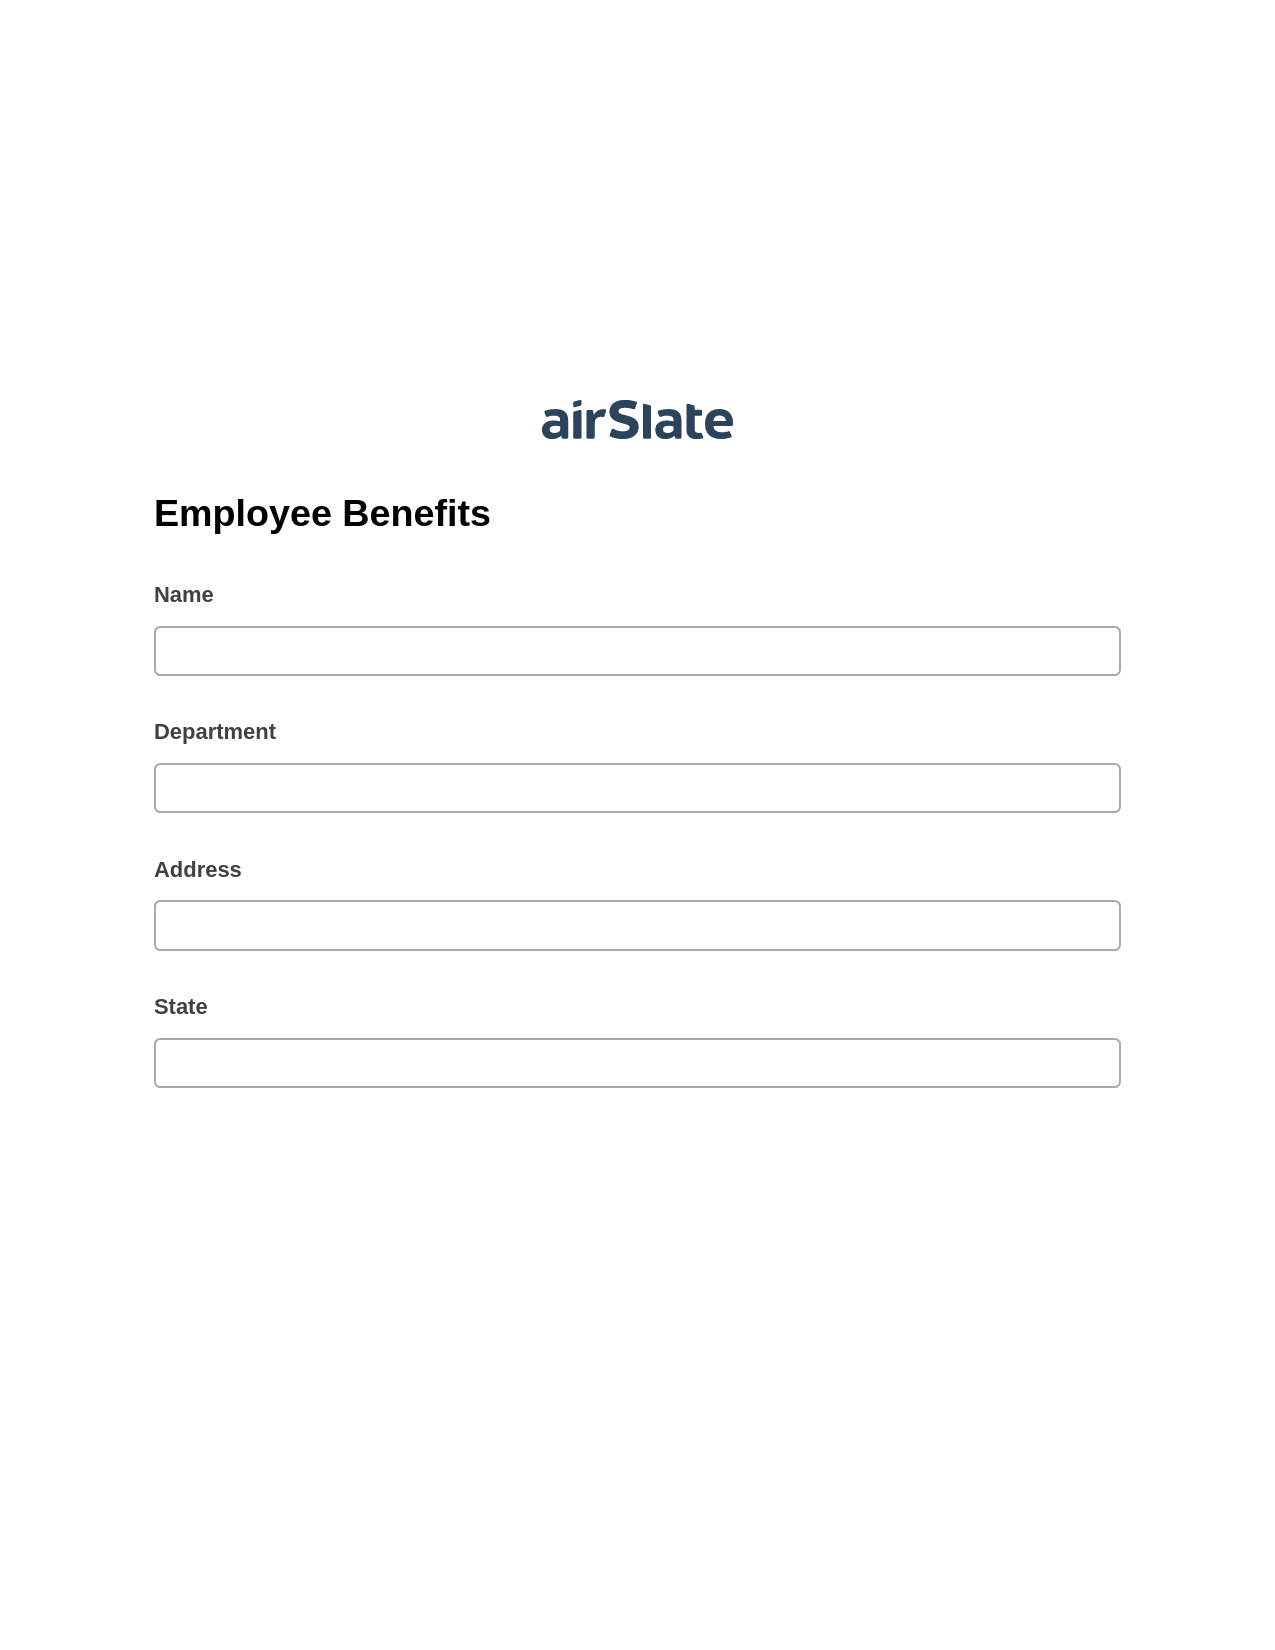 Employee Benefits Pre-fill from Excel Spreadsheet Bot, Email Notification Bot, Webhook Postfinish Bot